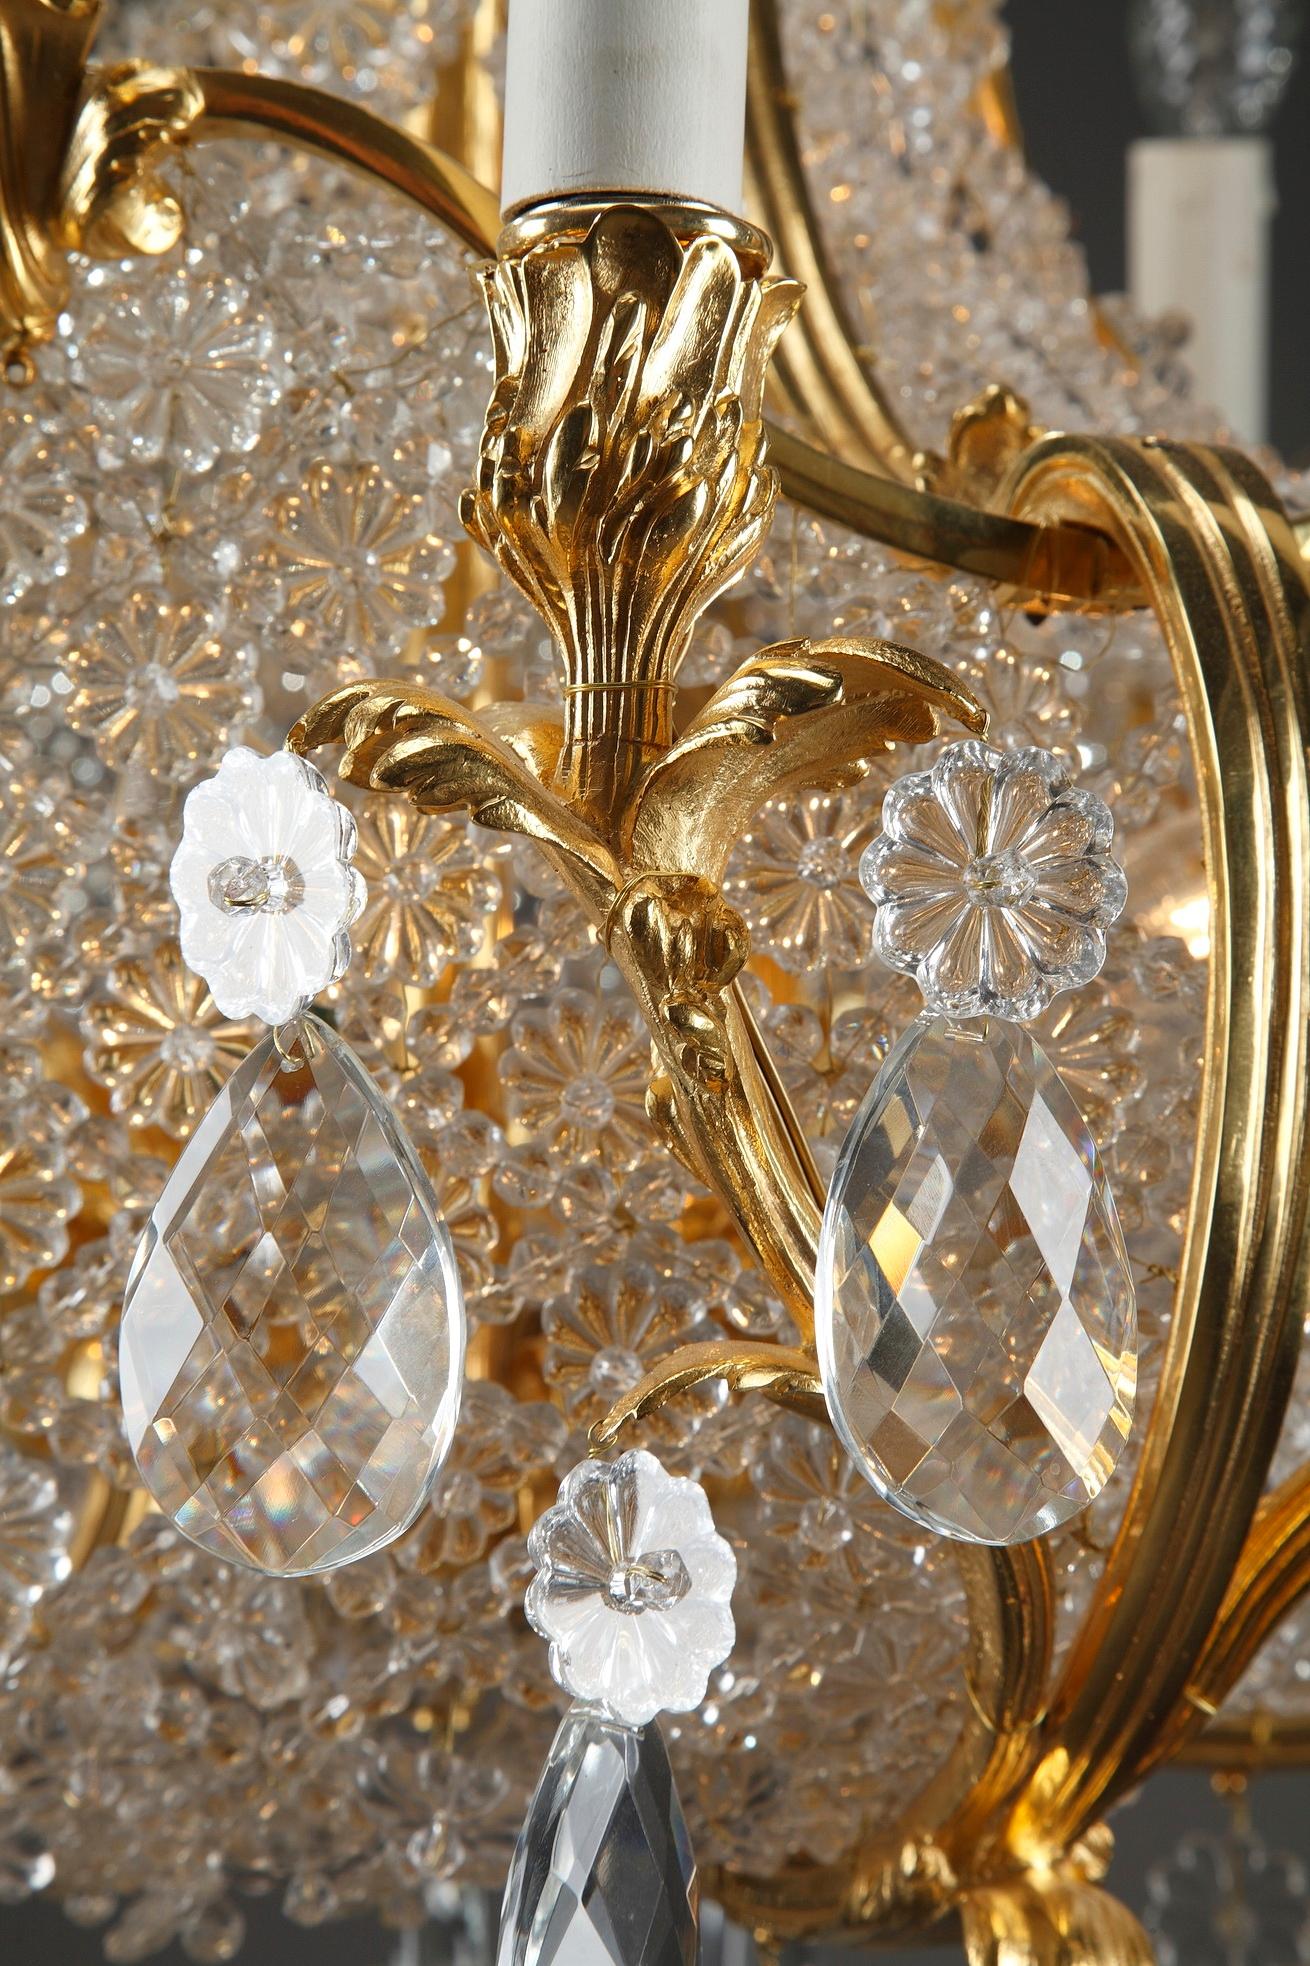 19th Century 10-Light Ormolu and Crystal Basket-Shaped Chandelier For Sale 8